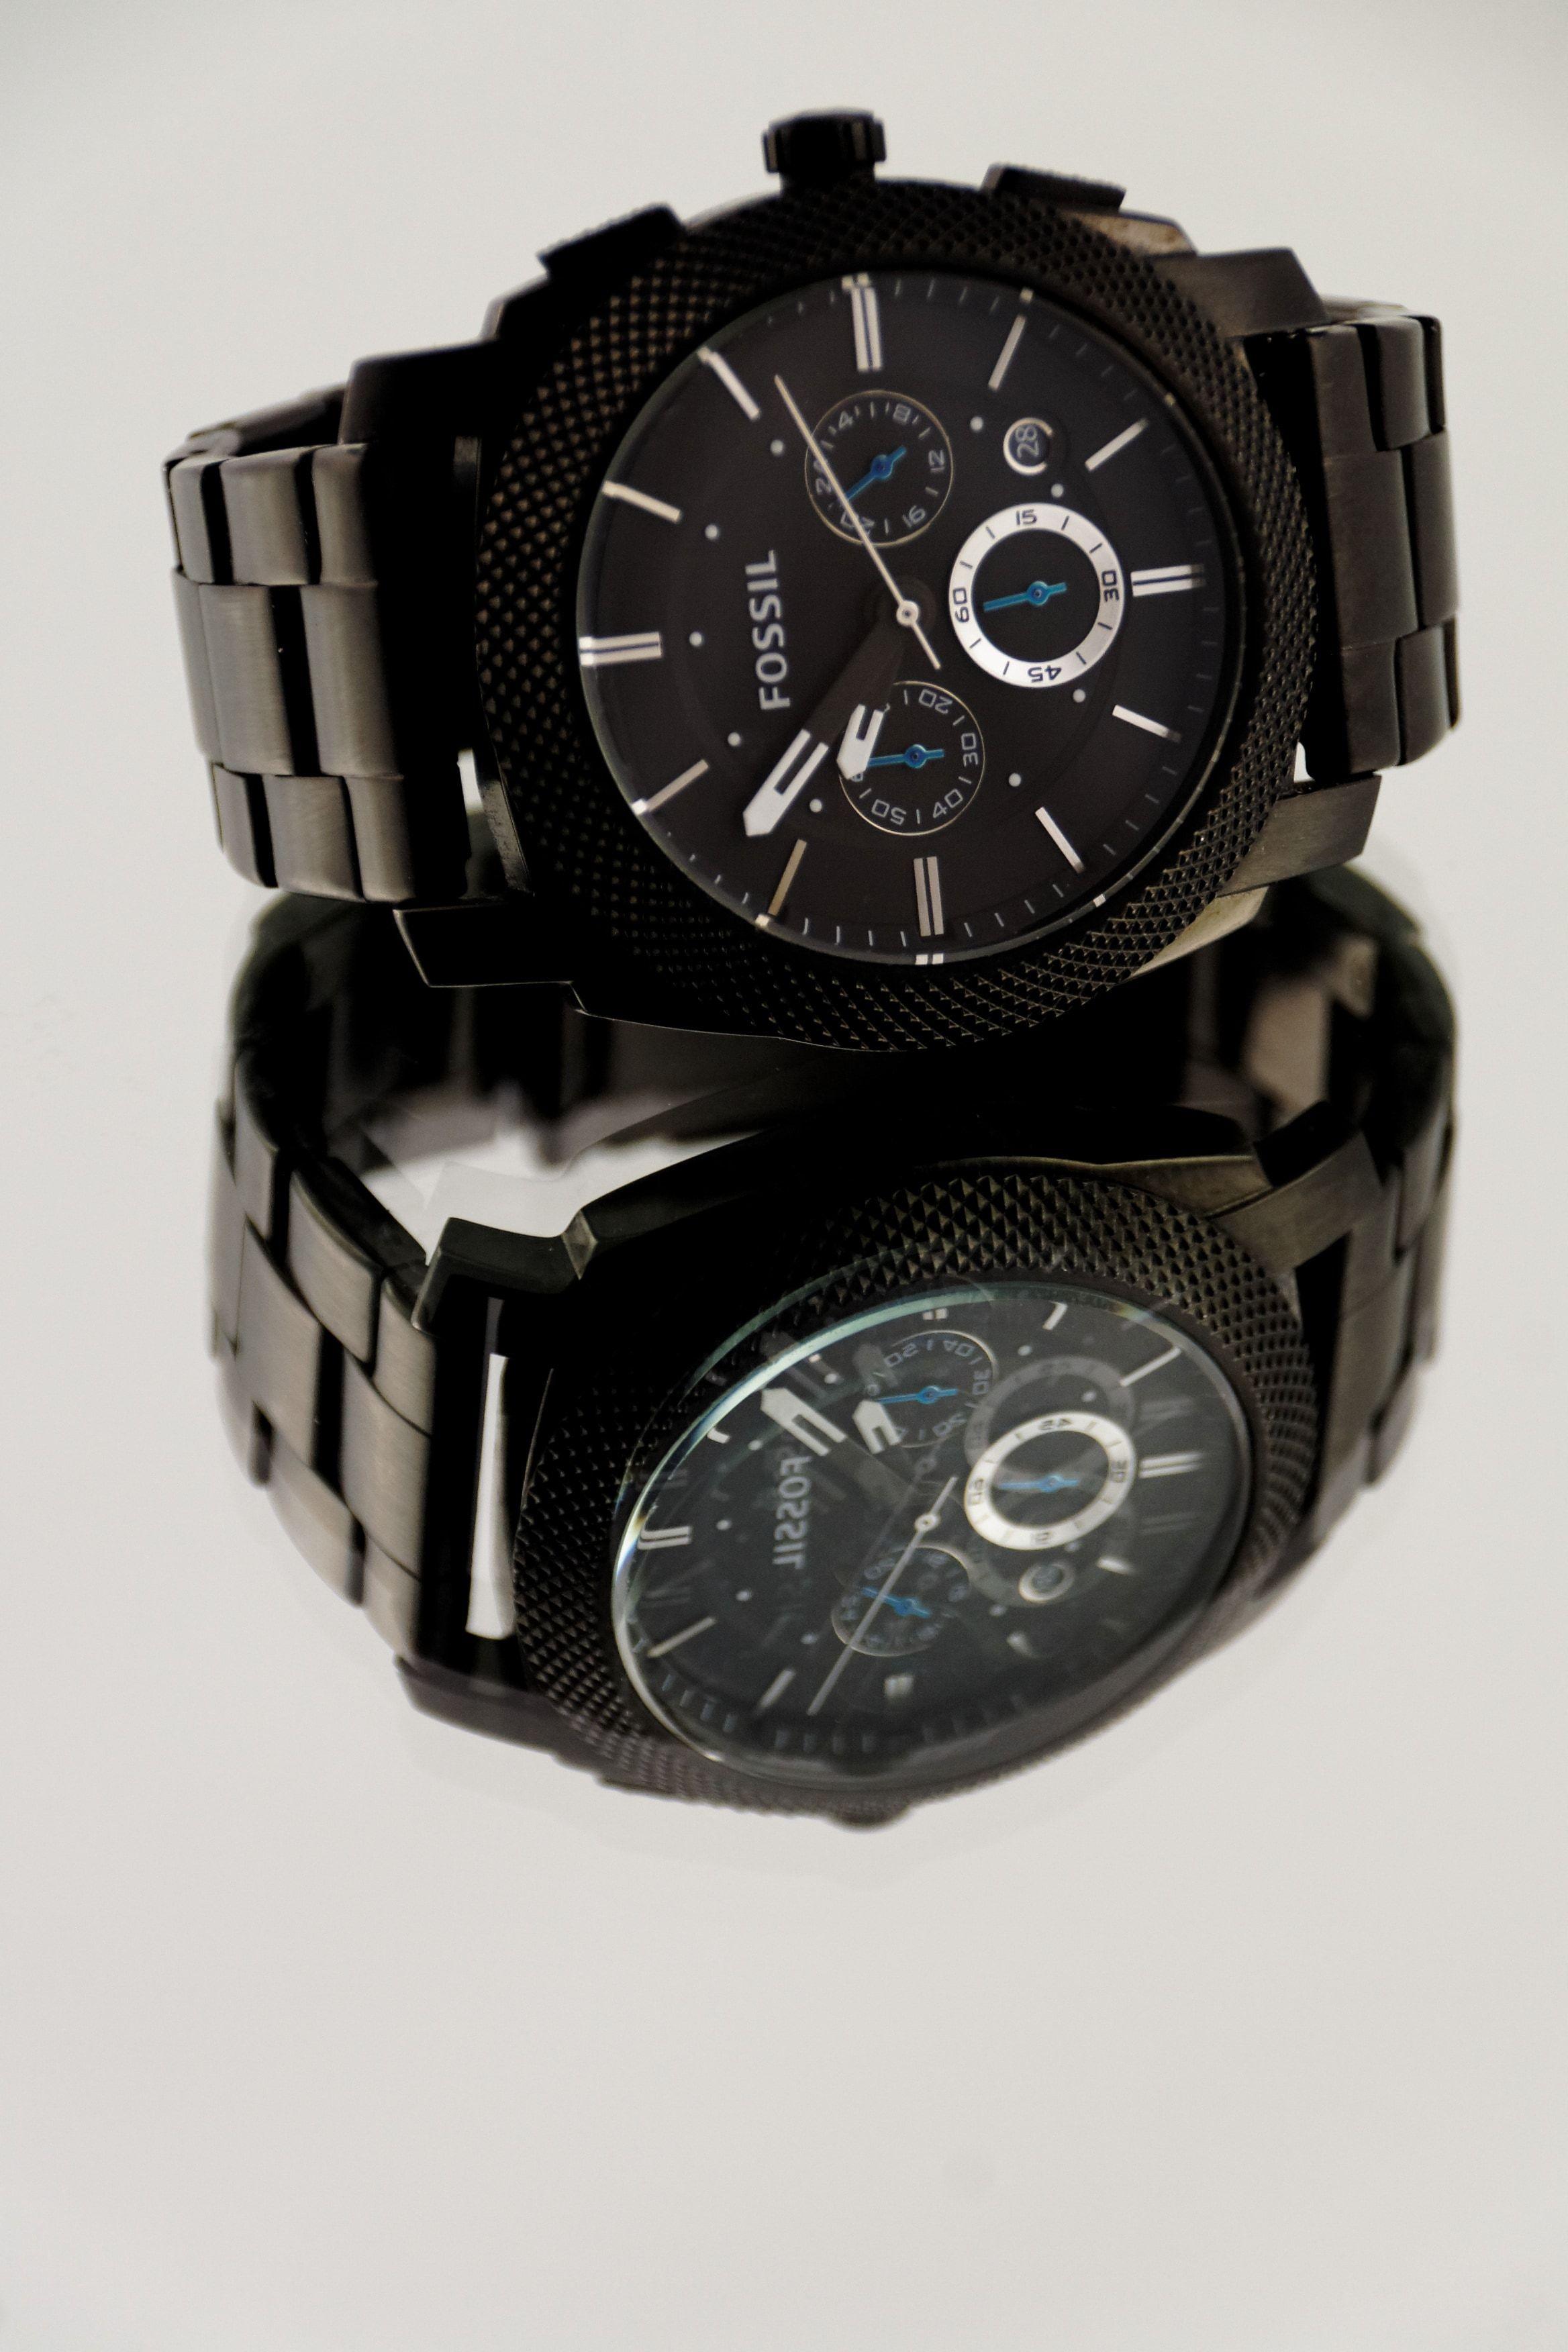 chronograph watches free image